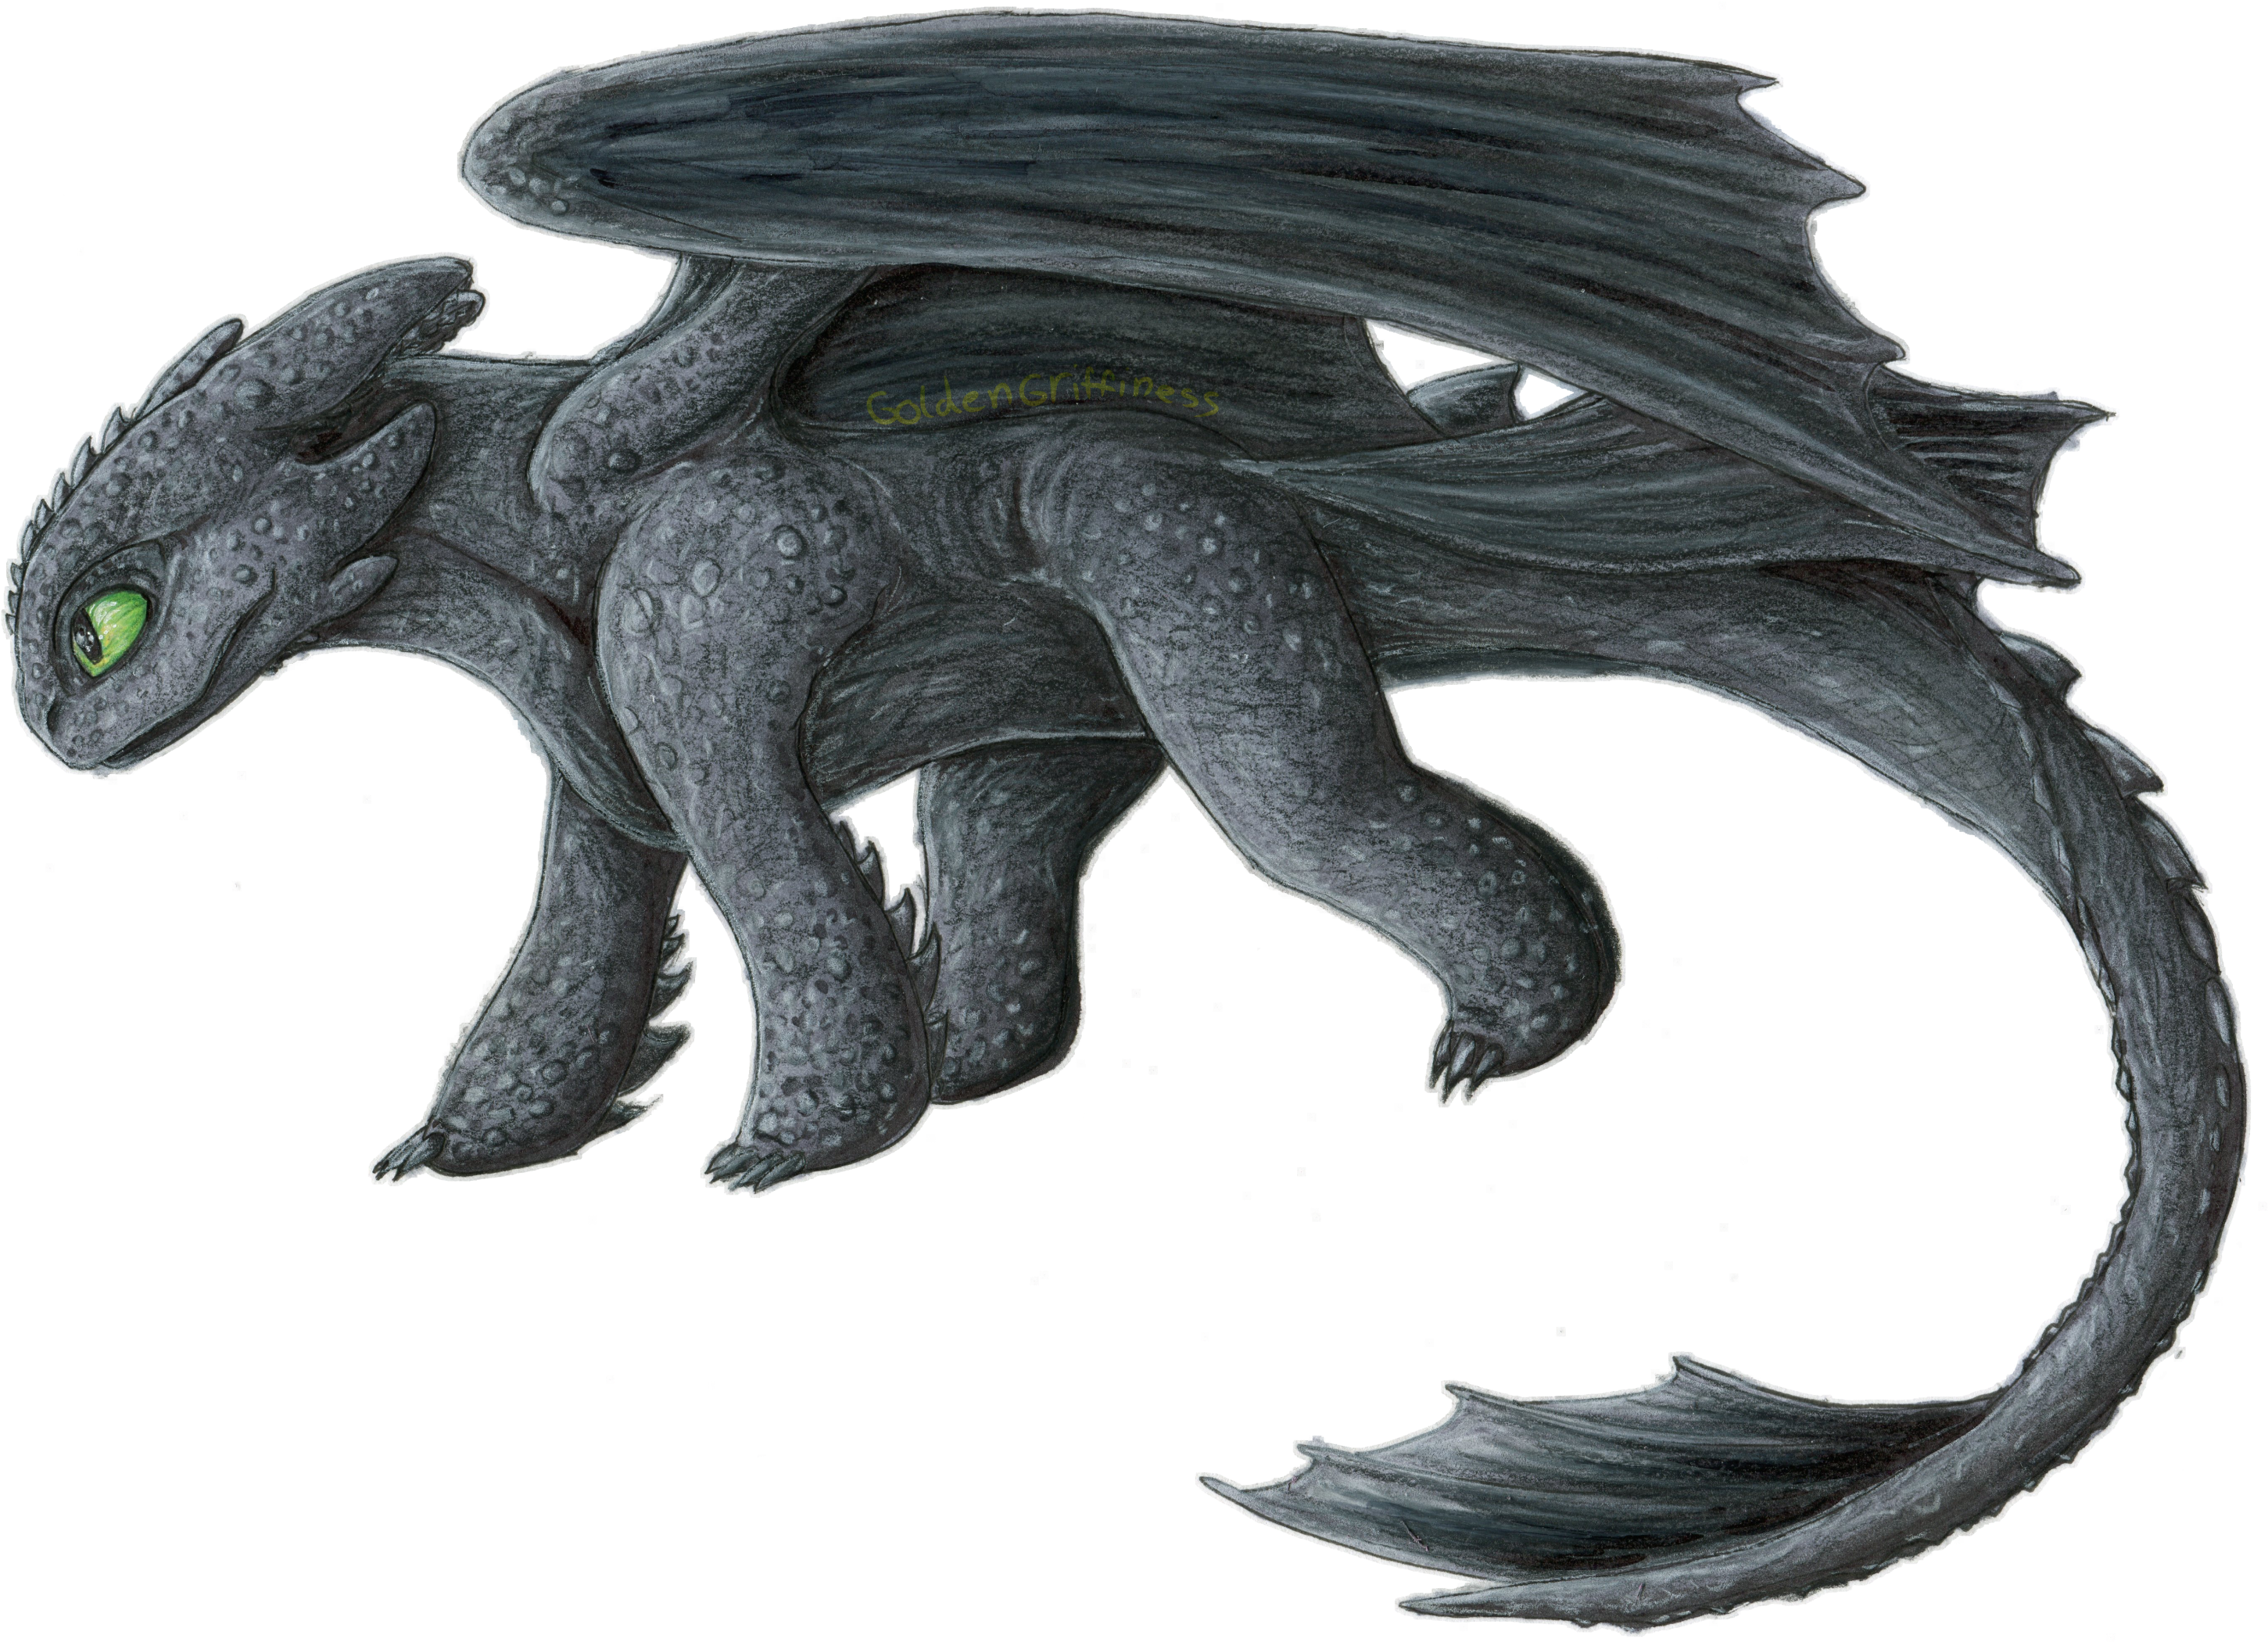 Toothless Dragon Free HQ Image PNG Image